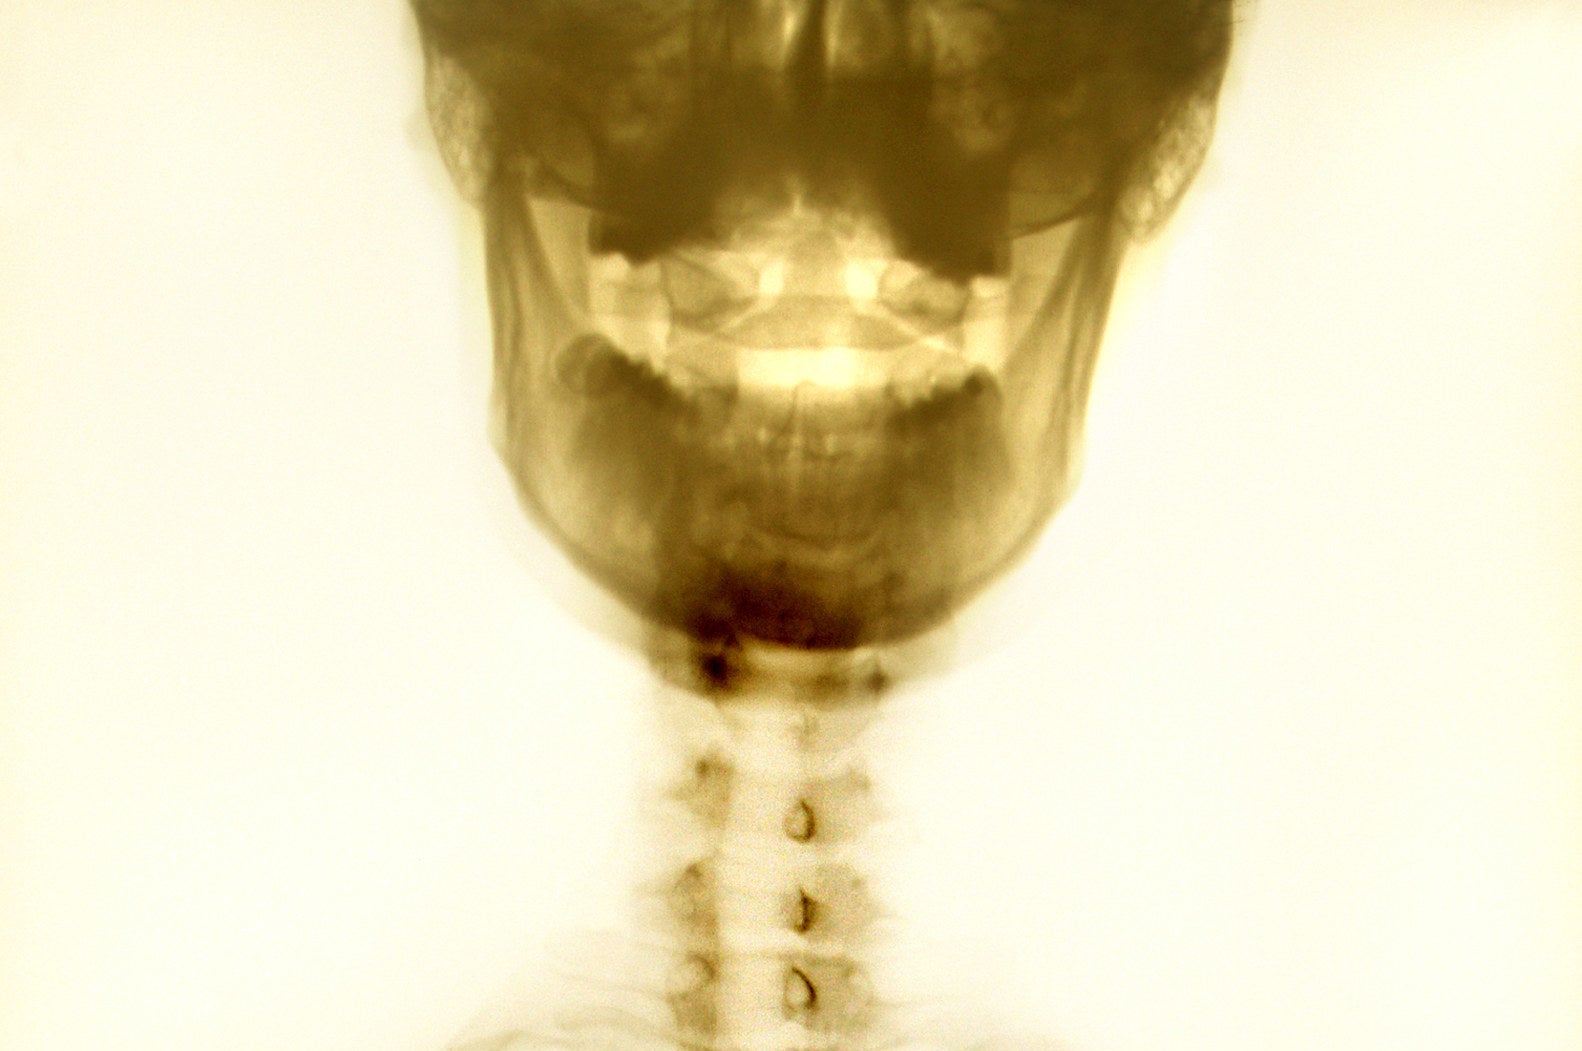 skeletal x-ray of a chin and jaw